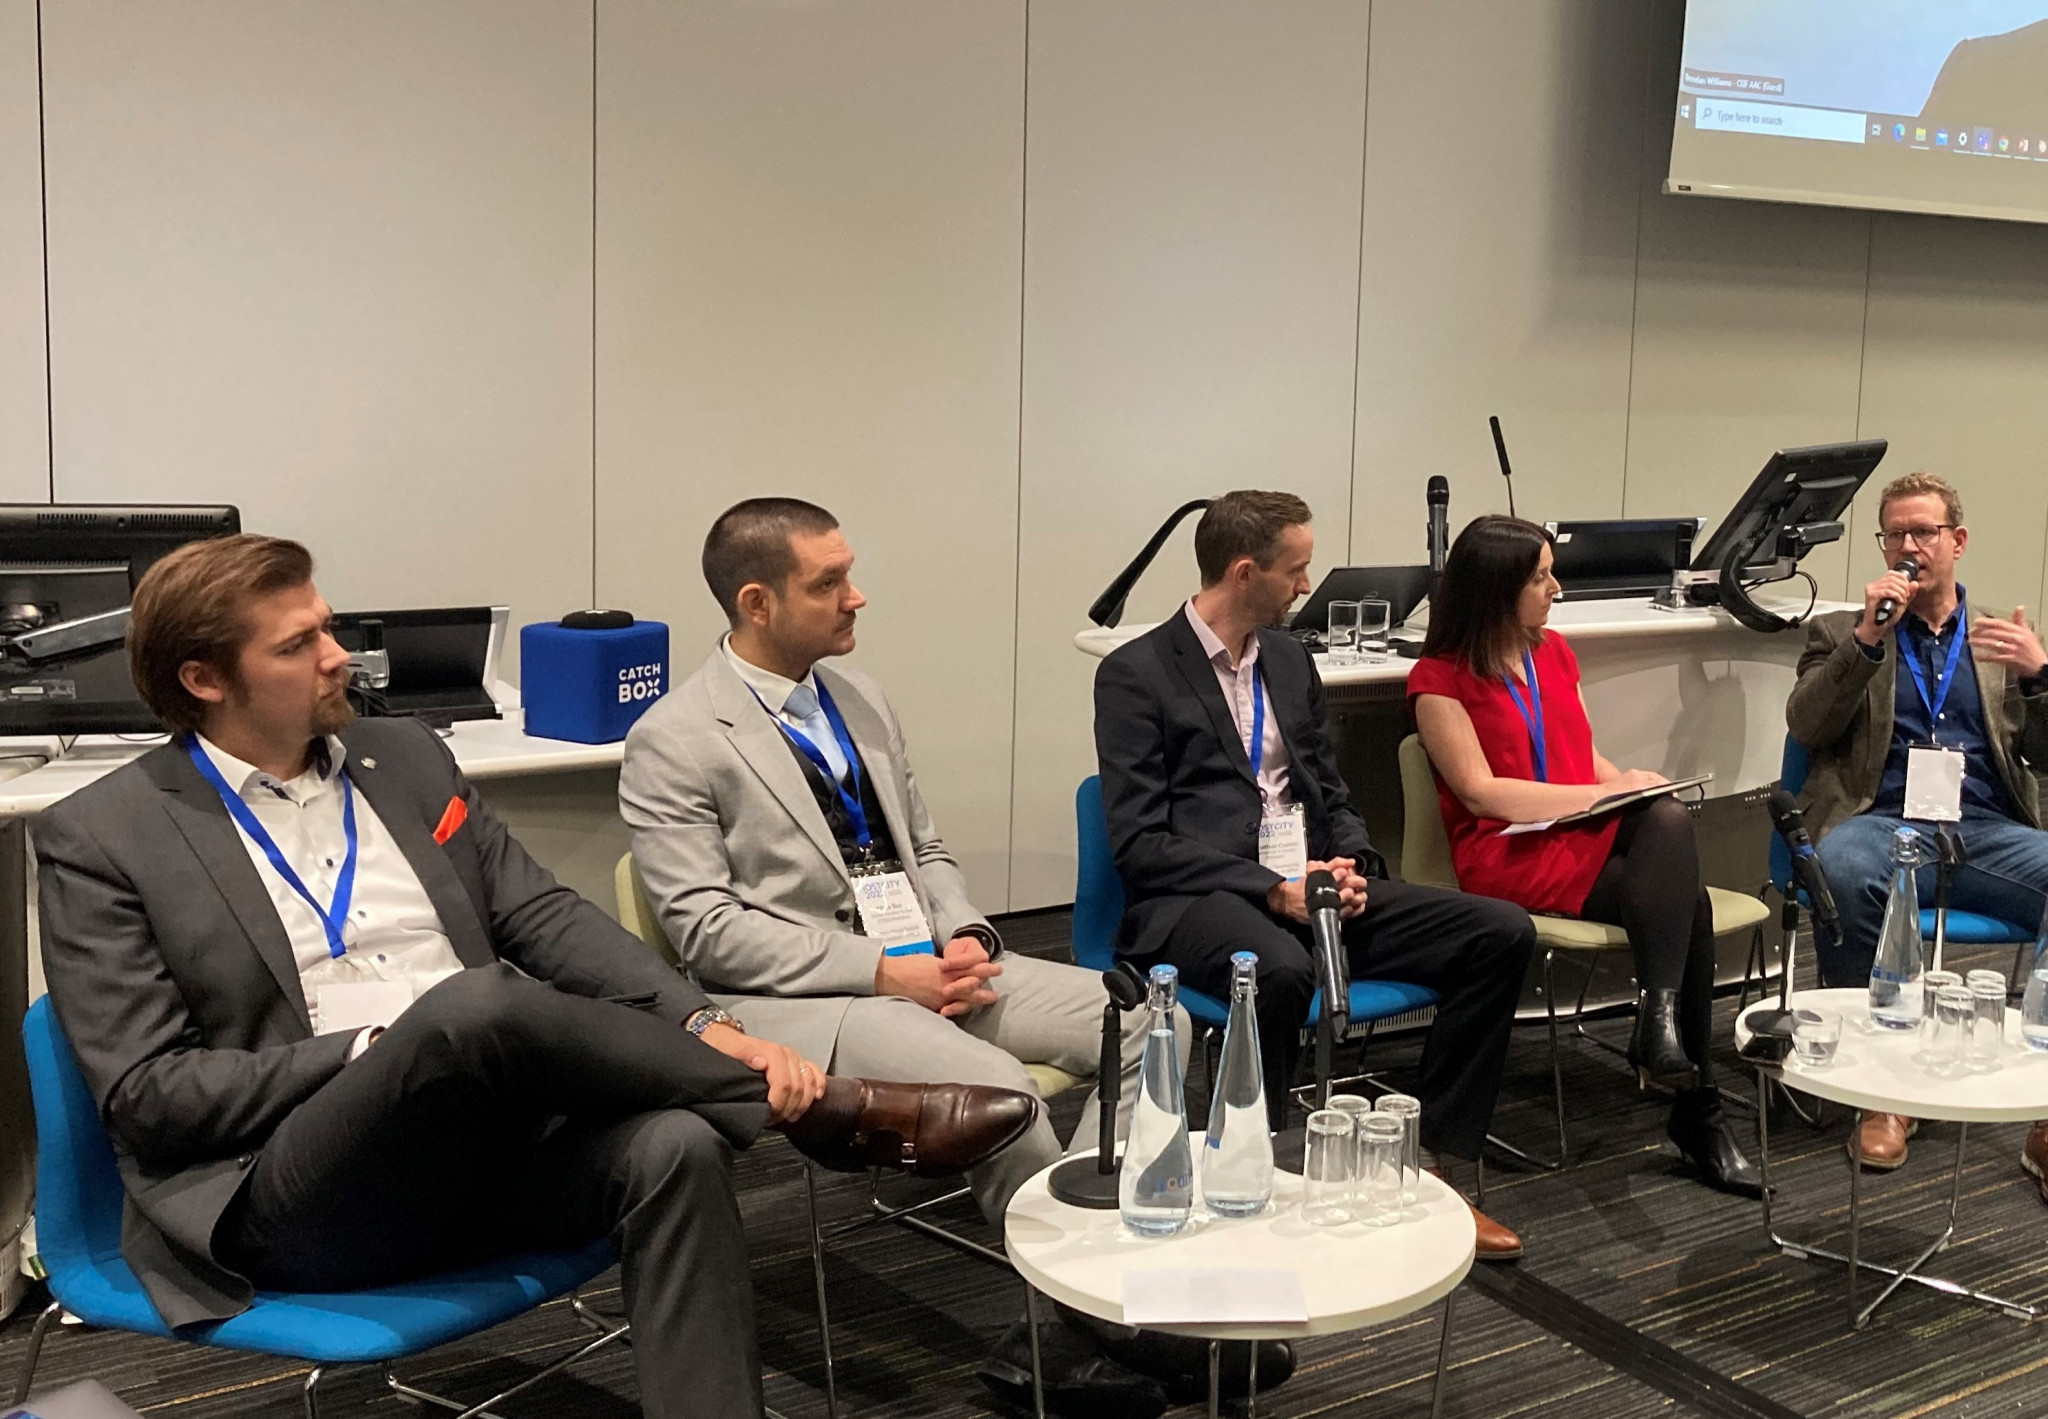 Gergely Murányi, furthest left, and Mate Bor, second left, represented FITEQ at the Host City 2022 Conference and Exhibition in Glasgow ©ITG